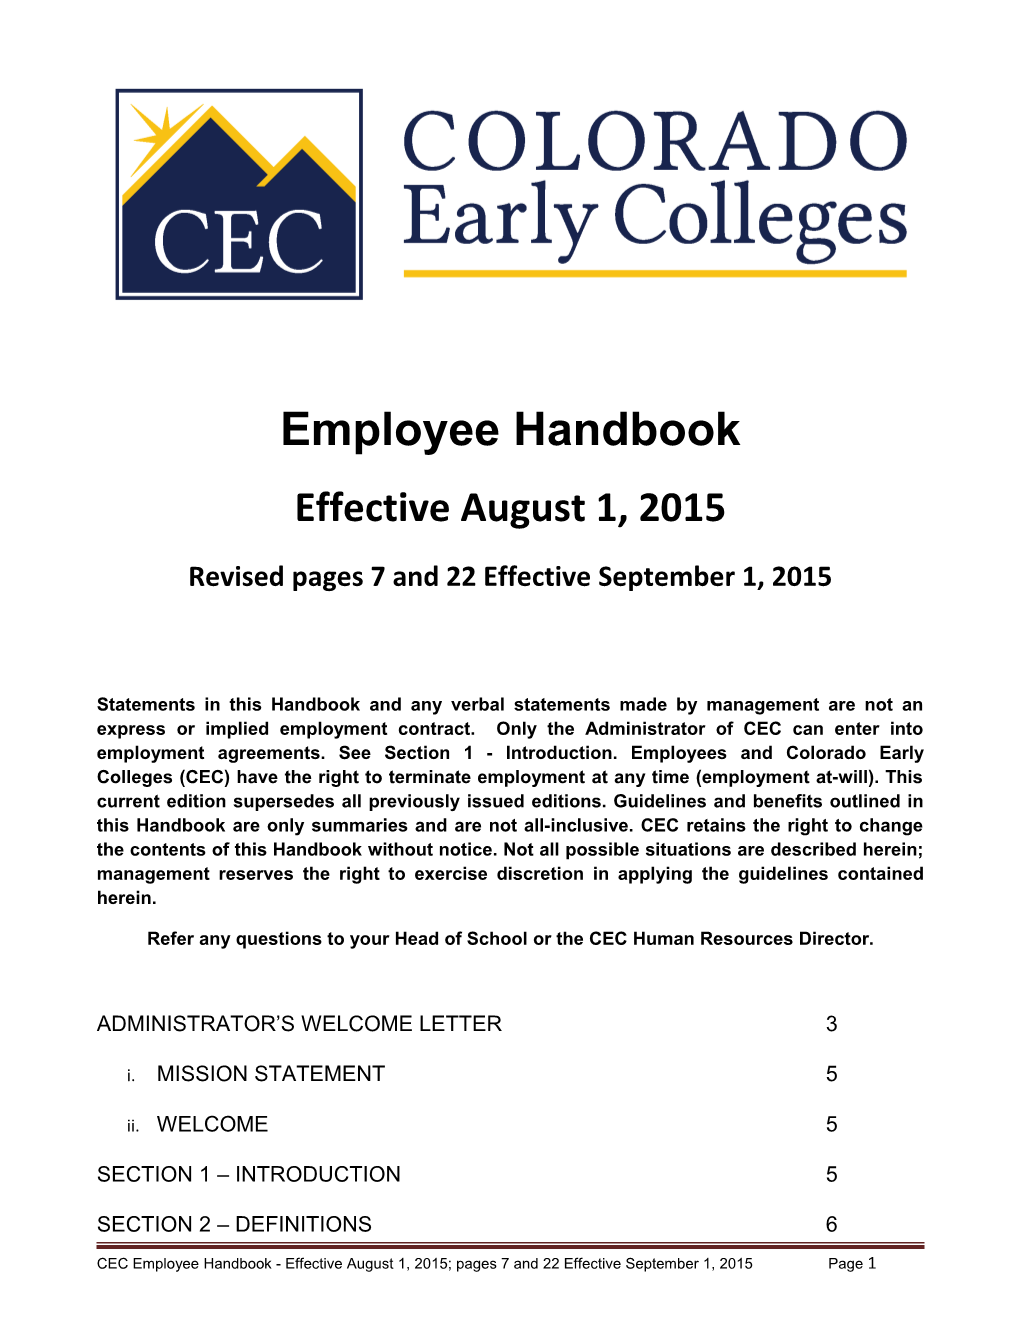 Revised Pages 7 and 22 Effective September 1, 2015